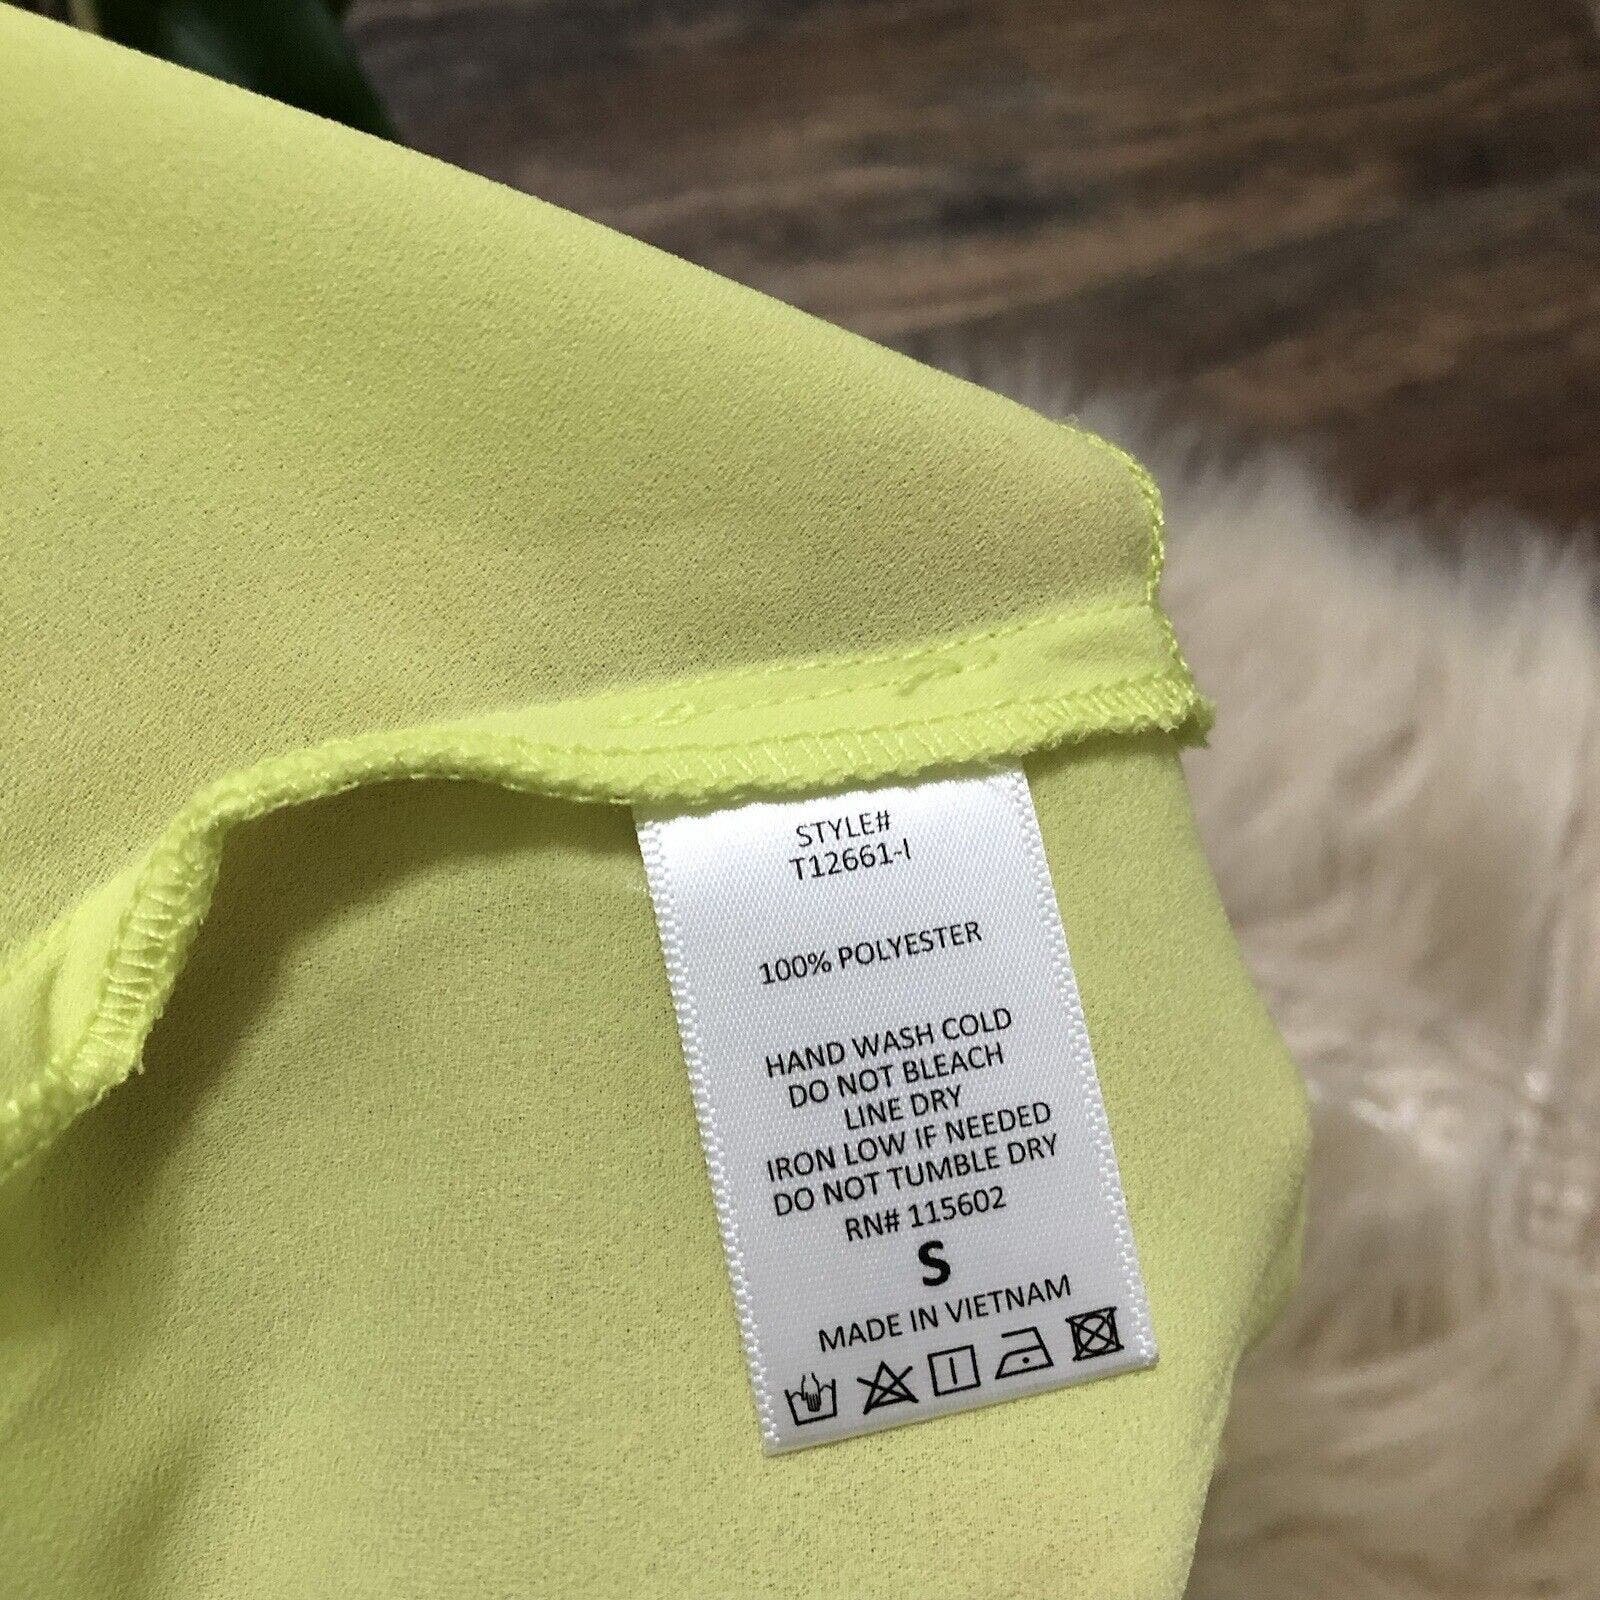 Affordable Nordstrom Lush Size Small Neon Yellow Sheer V Neck Cropped Cami Tank Top NWT JT7g9SMId Cheap